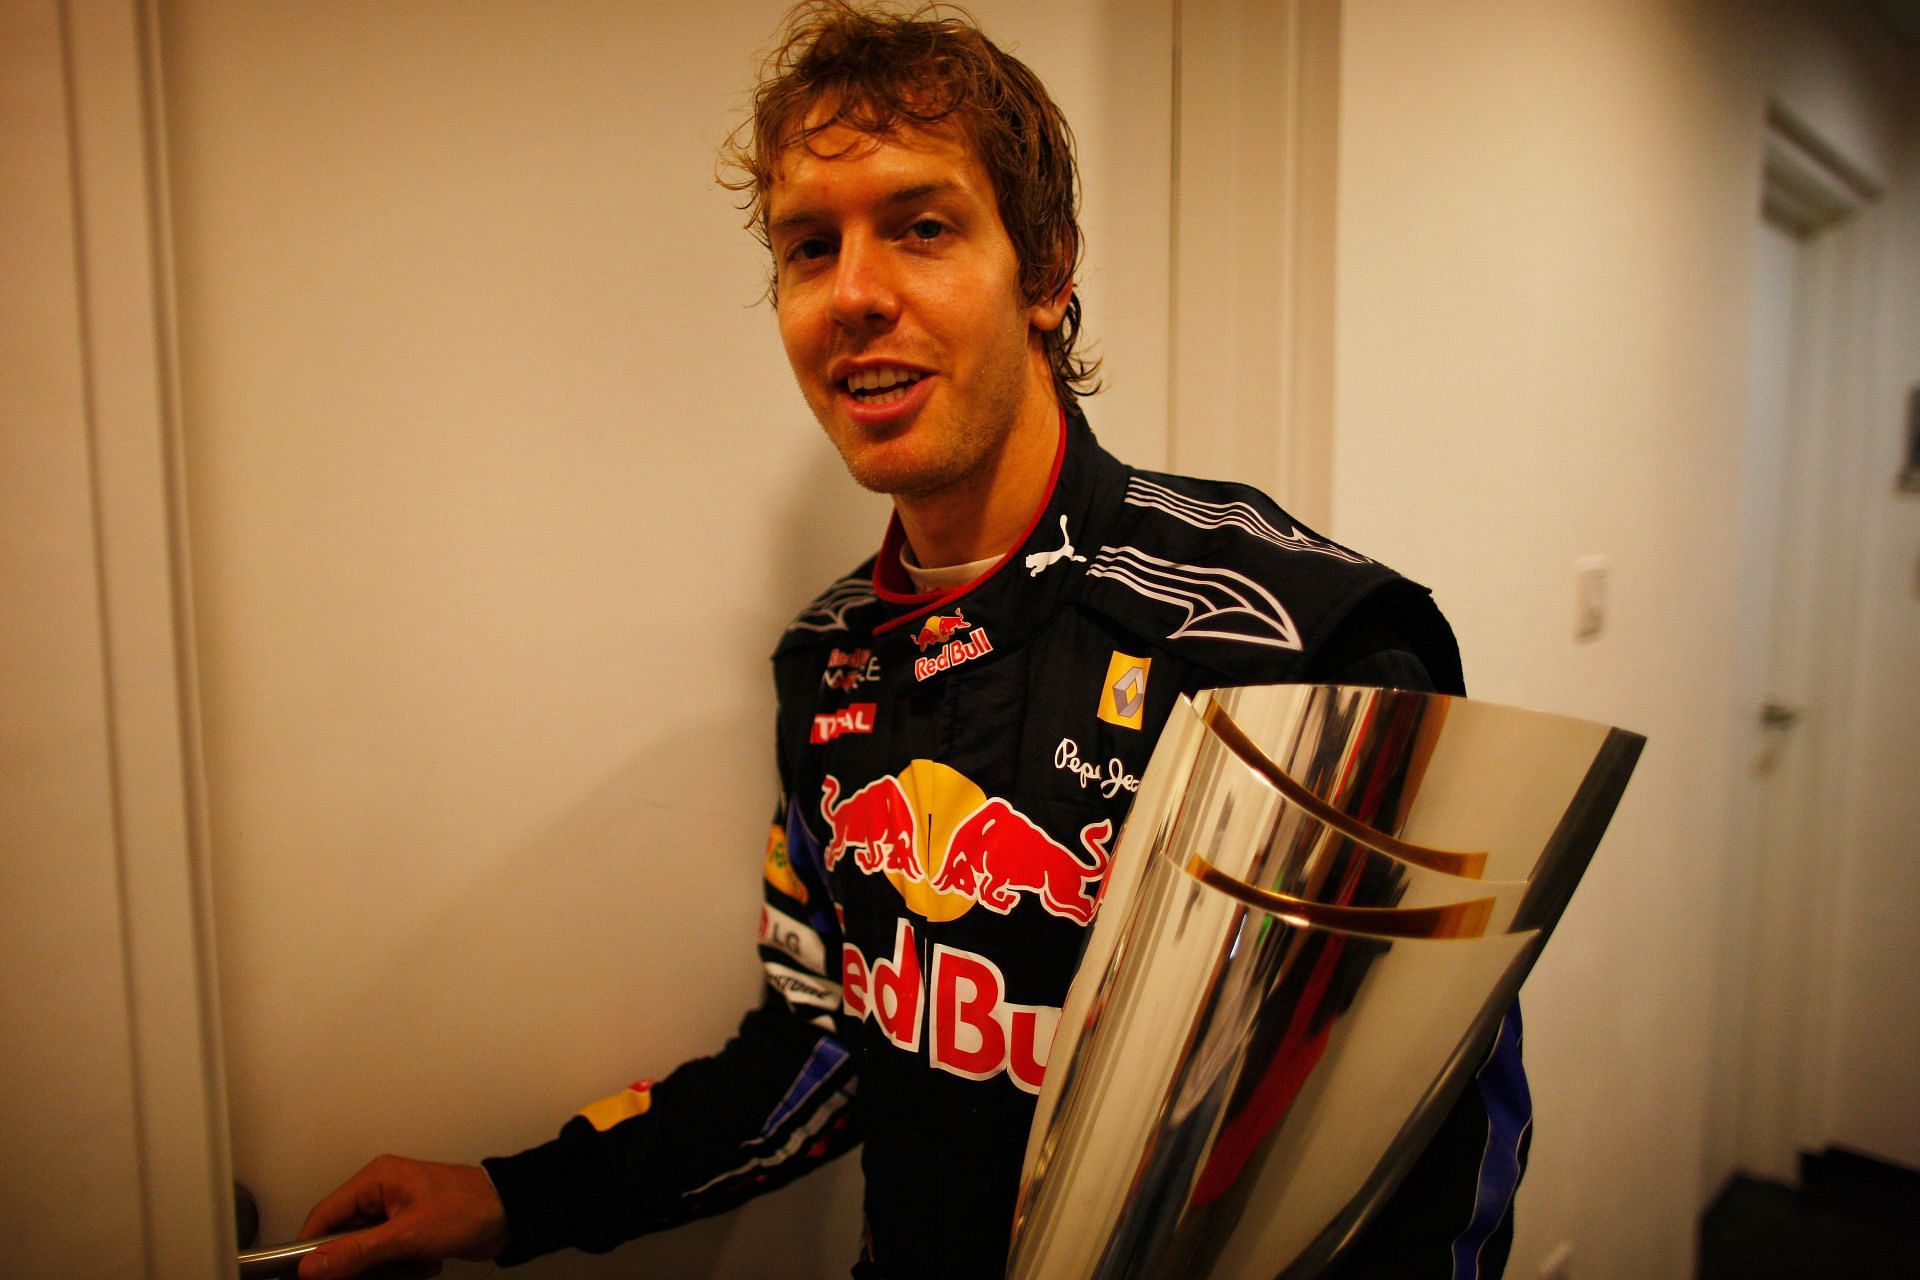 Vettel made the most of an outside chance to win the title in 2010